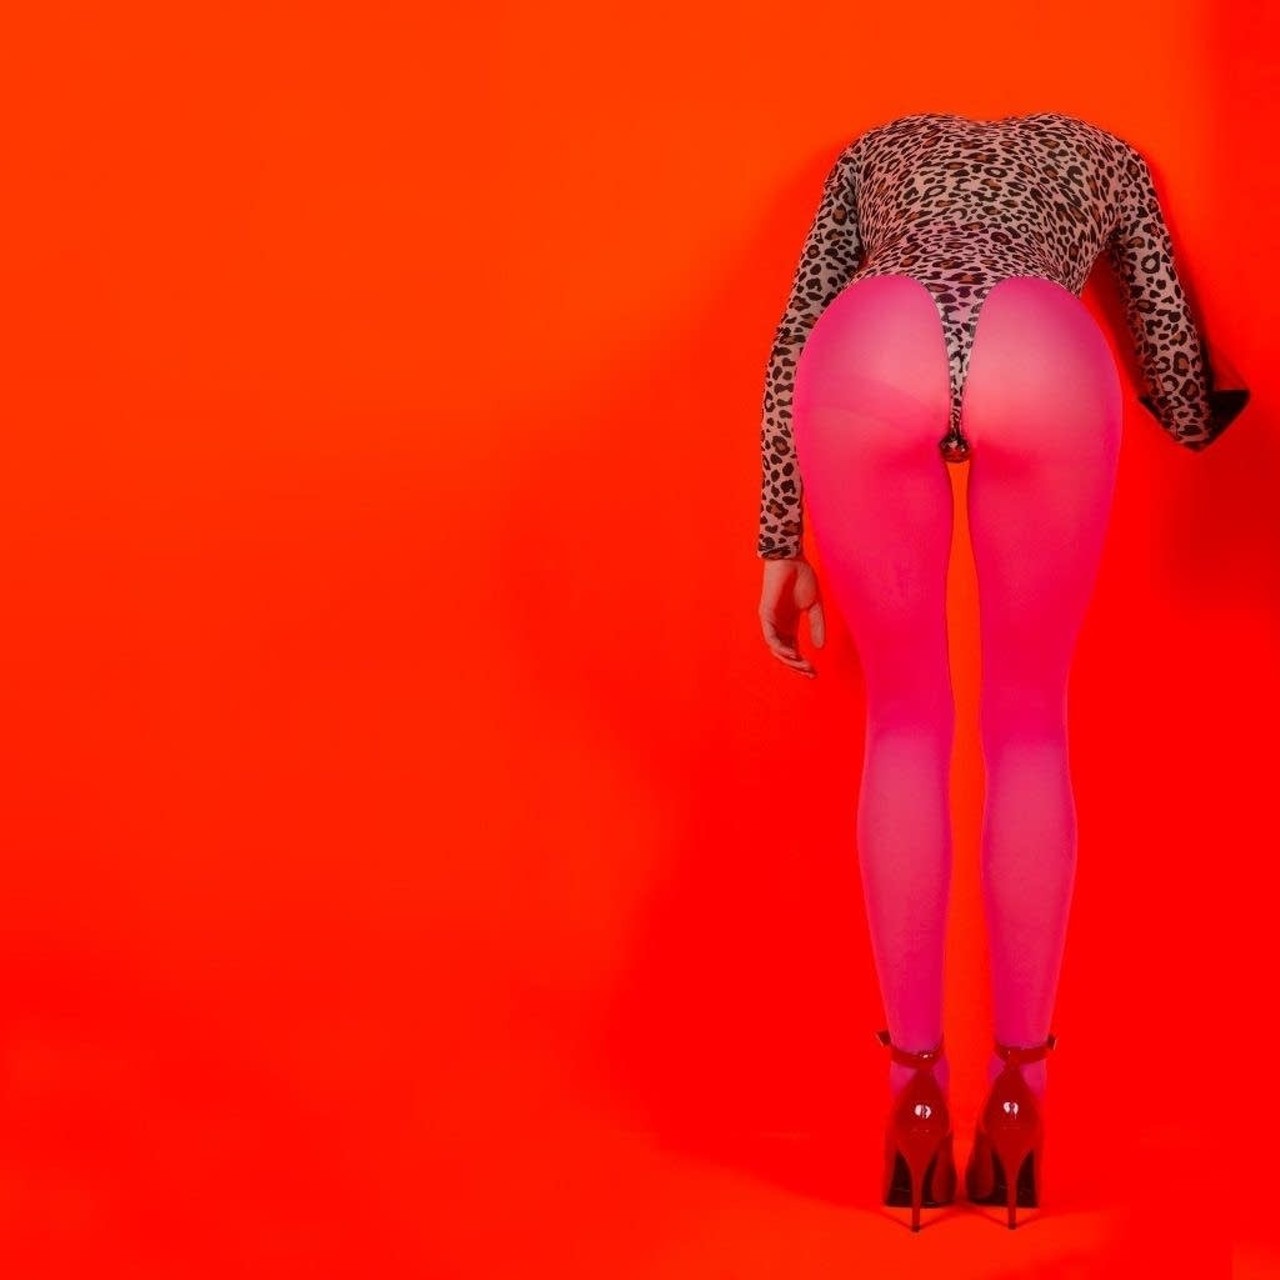 4. St. Vincent | Masseduction
To call St. Vincent's Masseduction provocative would be missing the point entirely. Annie Clark's fifth album is her most direct yet, tackling loss and pining &#151; all while maintaining a steady flow of Clark's signature theatrics that skirt the lines of feral and therapeutic. Clark paints a world dripping with intimate details, discordant string arrangements, and jarring rock elements that lend themselves to Masseduction's romantic defiance.
Listen to: "Los Ageless" and "Smoking Section."
Add this lyric to your wedding vows: "You're the only motherfucker in the city/ who can handle me."